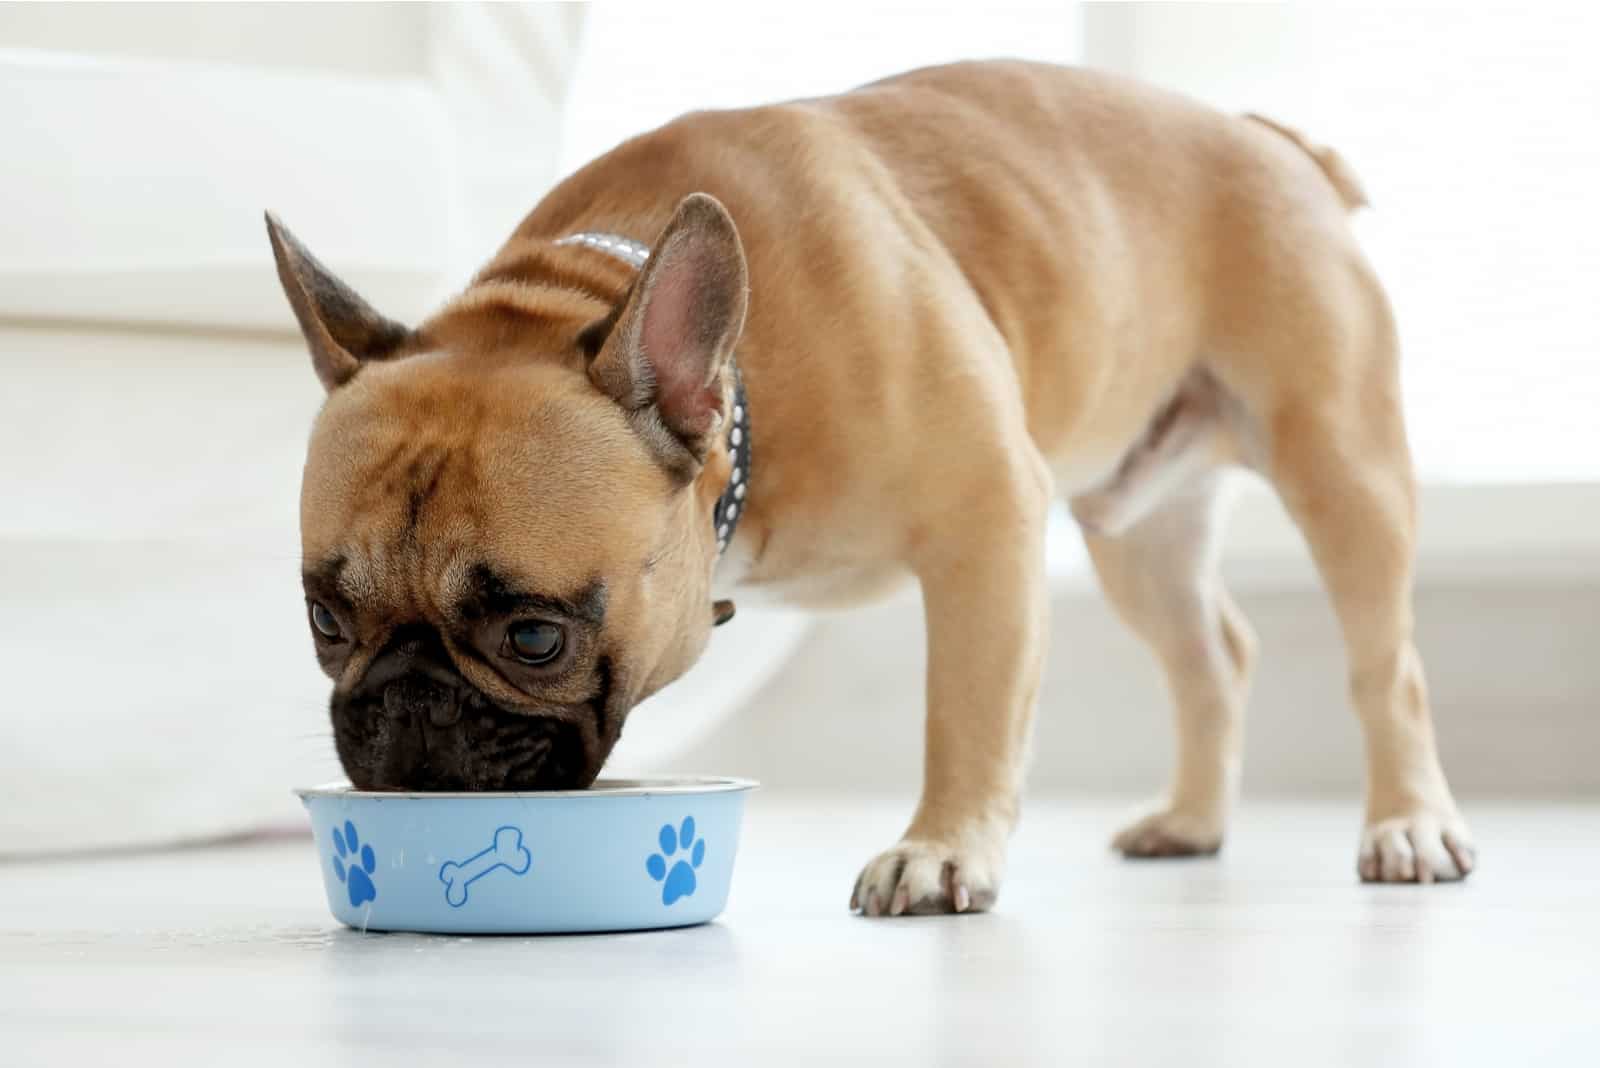 Cute dog eating food from bowl